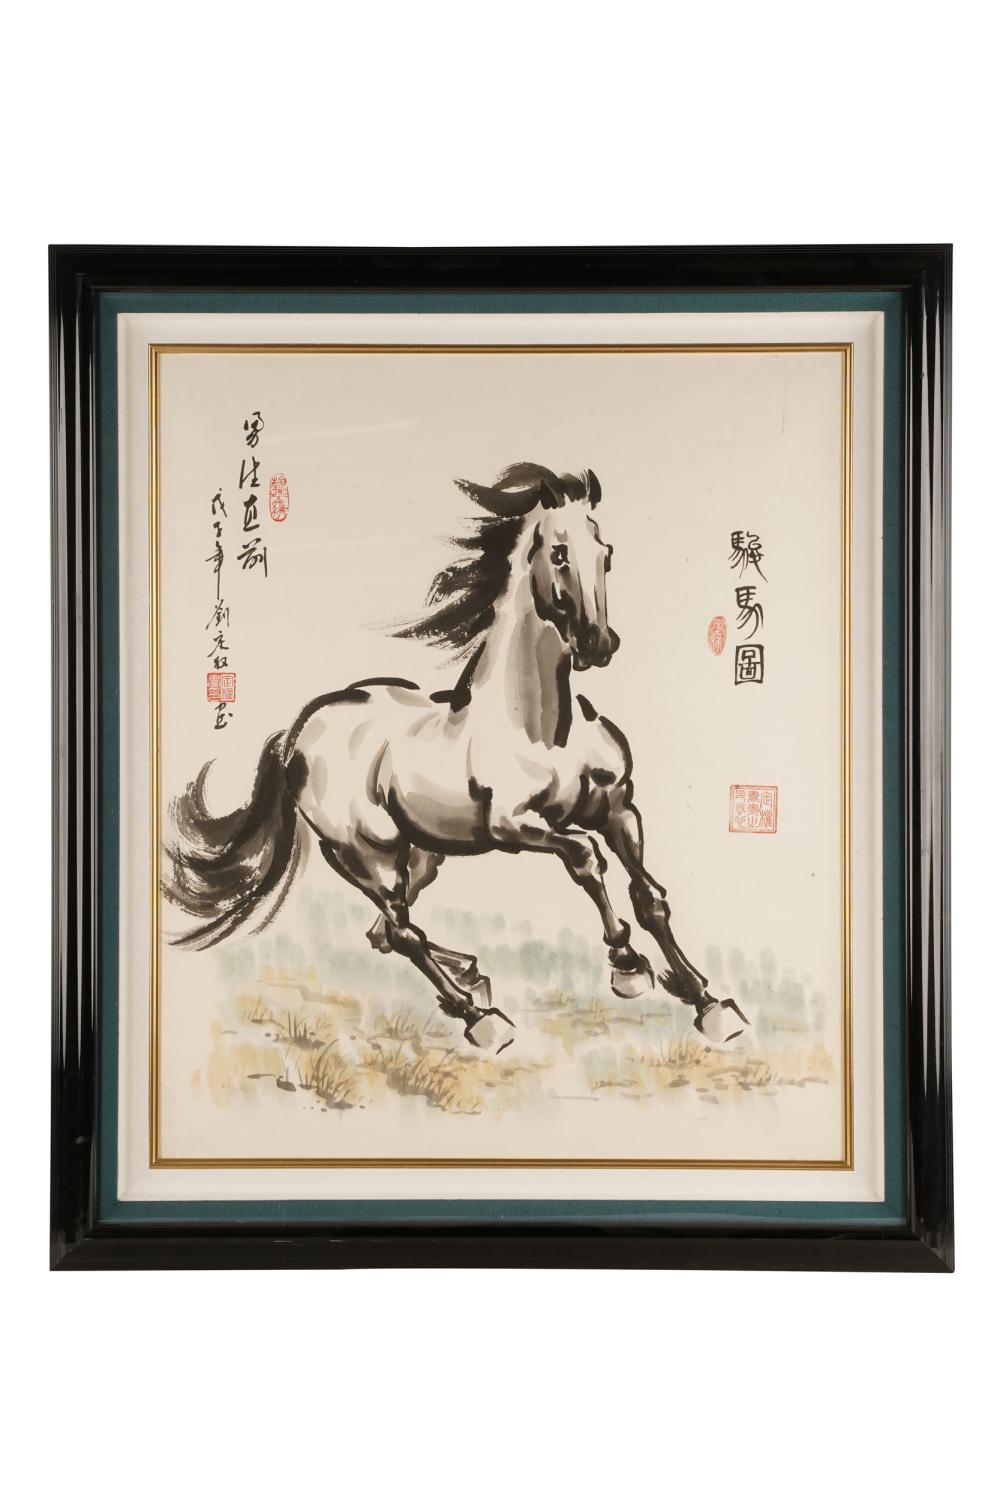 GALLOPING HORSEwatercolor, with